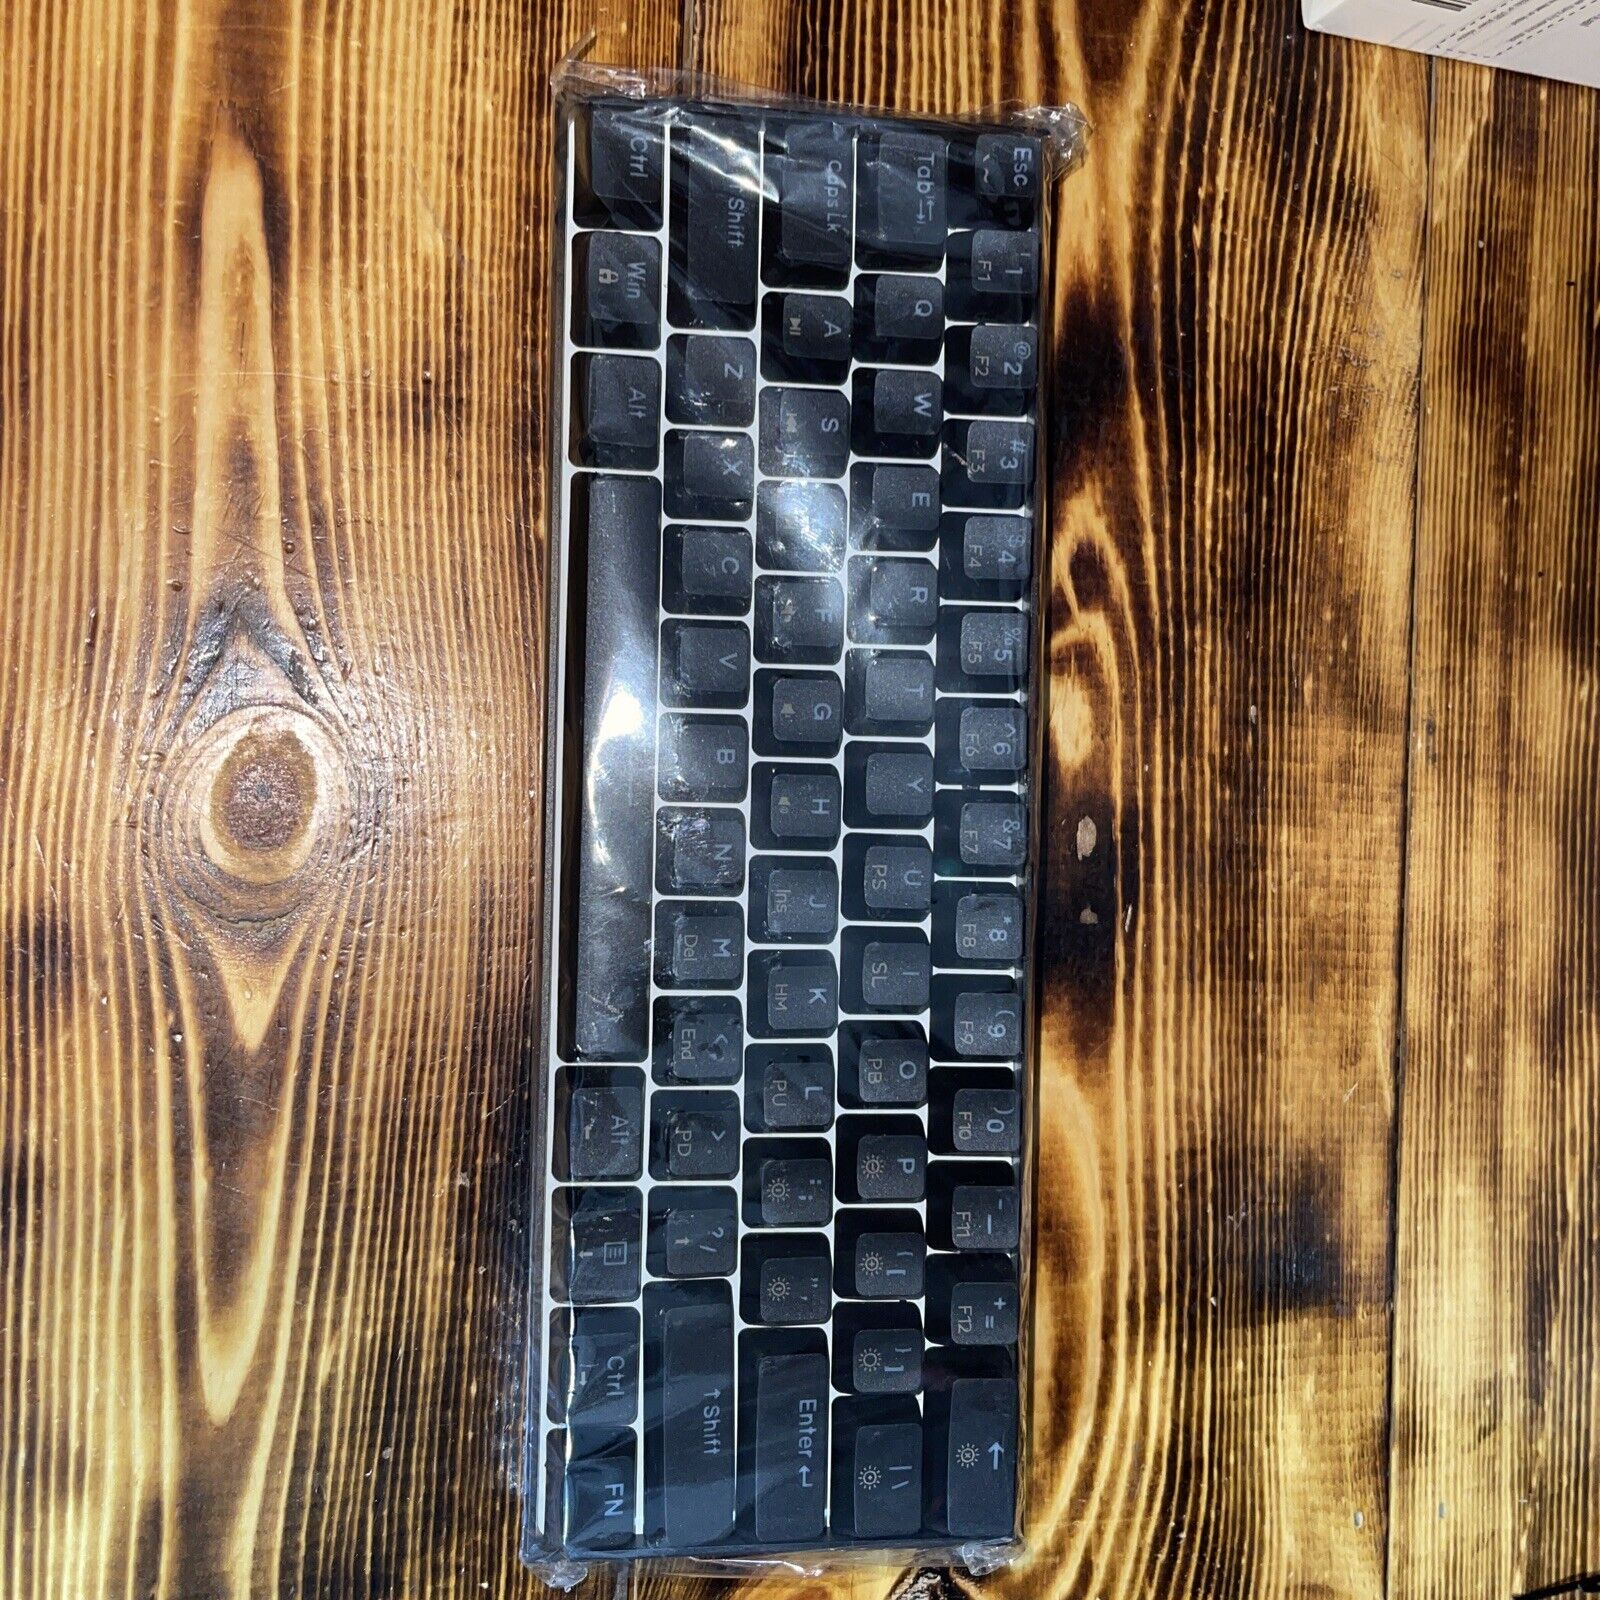  DK61E 60% Mechanical Gaming Keyboard, RGB Backlit Wired PBT DK61E-Brown Switch